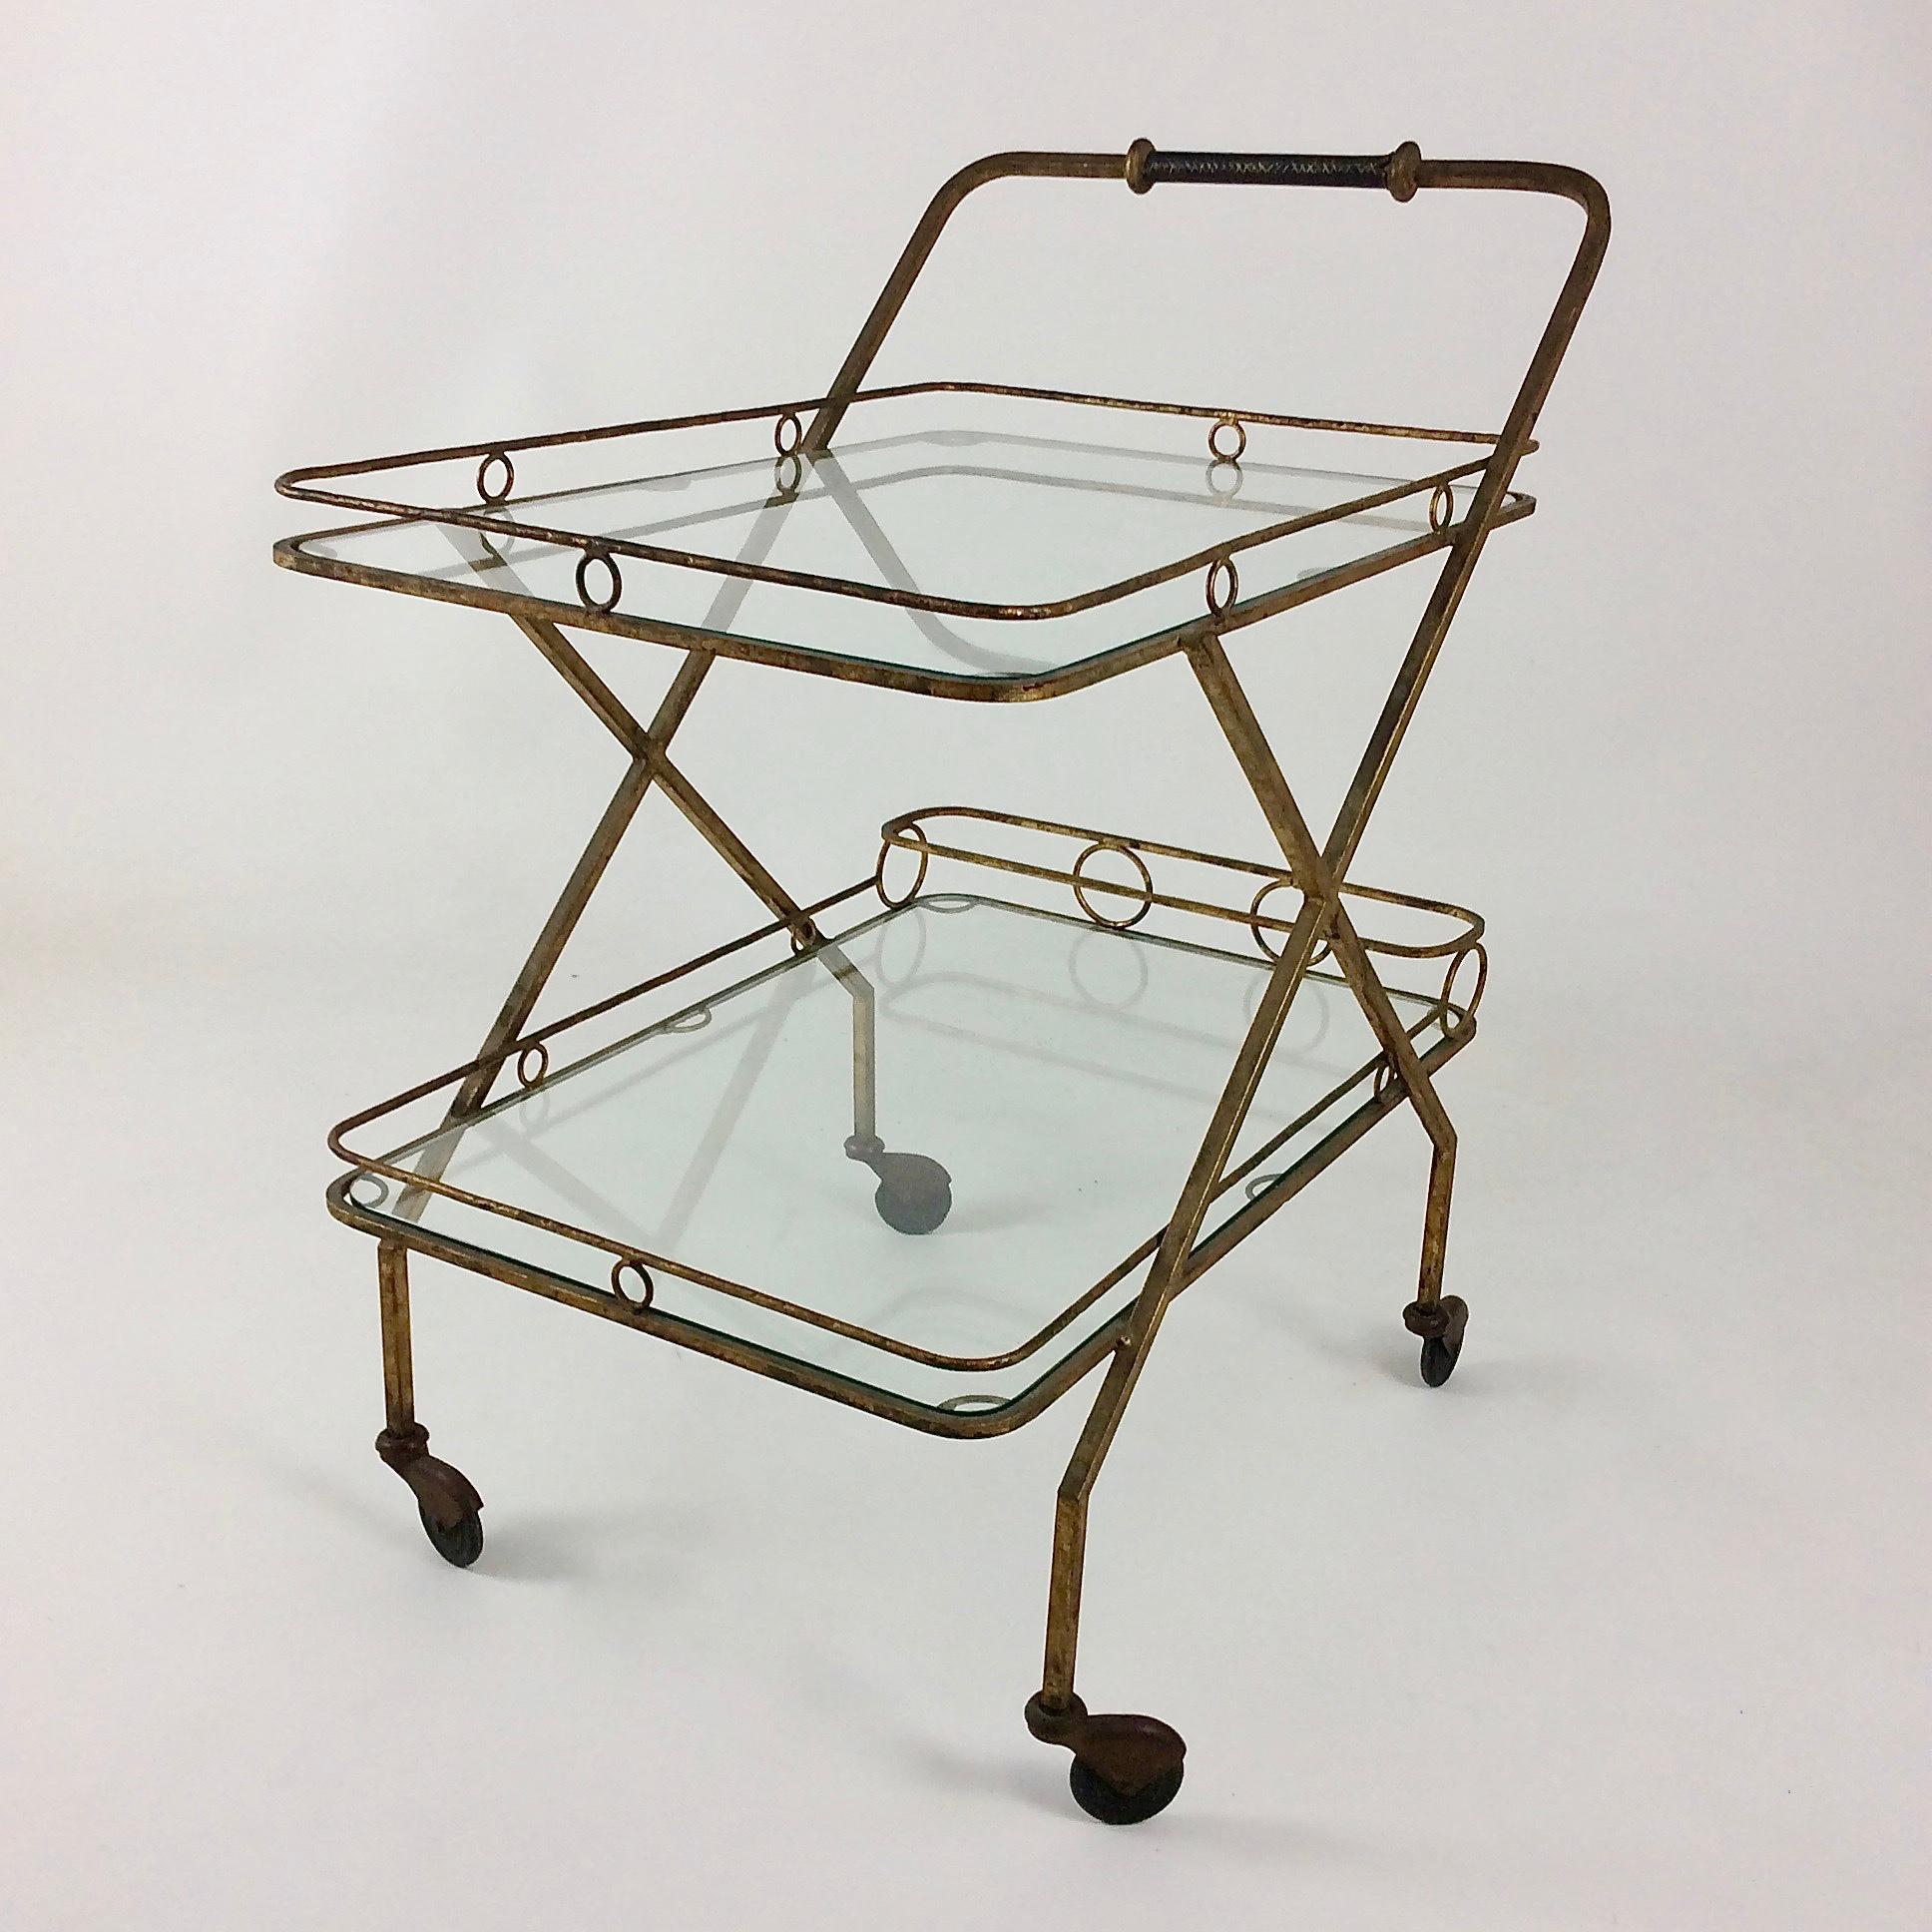 Nice bar cart, circa 1960, France
Gilt metal, one bottle holder and two glass shelves.
Black leather handle.
Dimensions: 81 cm H, 71 cm W, 48 cm D.
Original condition.
All purchases are covered by our Buyer Protection Guarantee.
This item can be